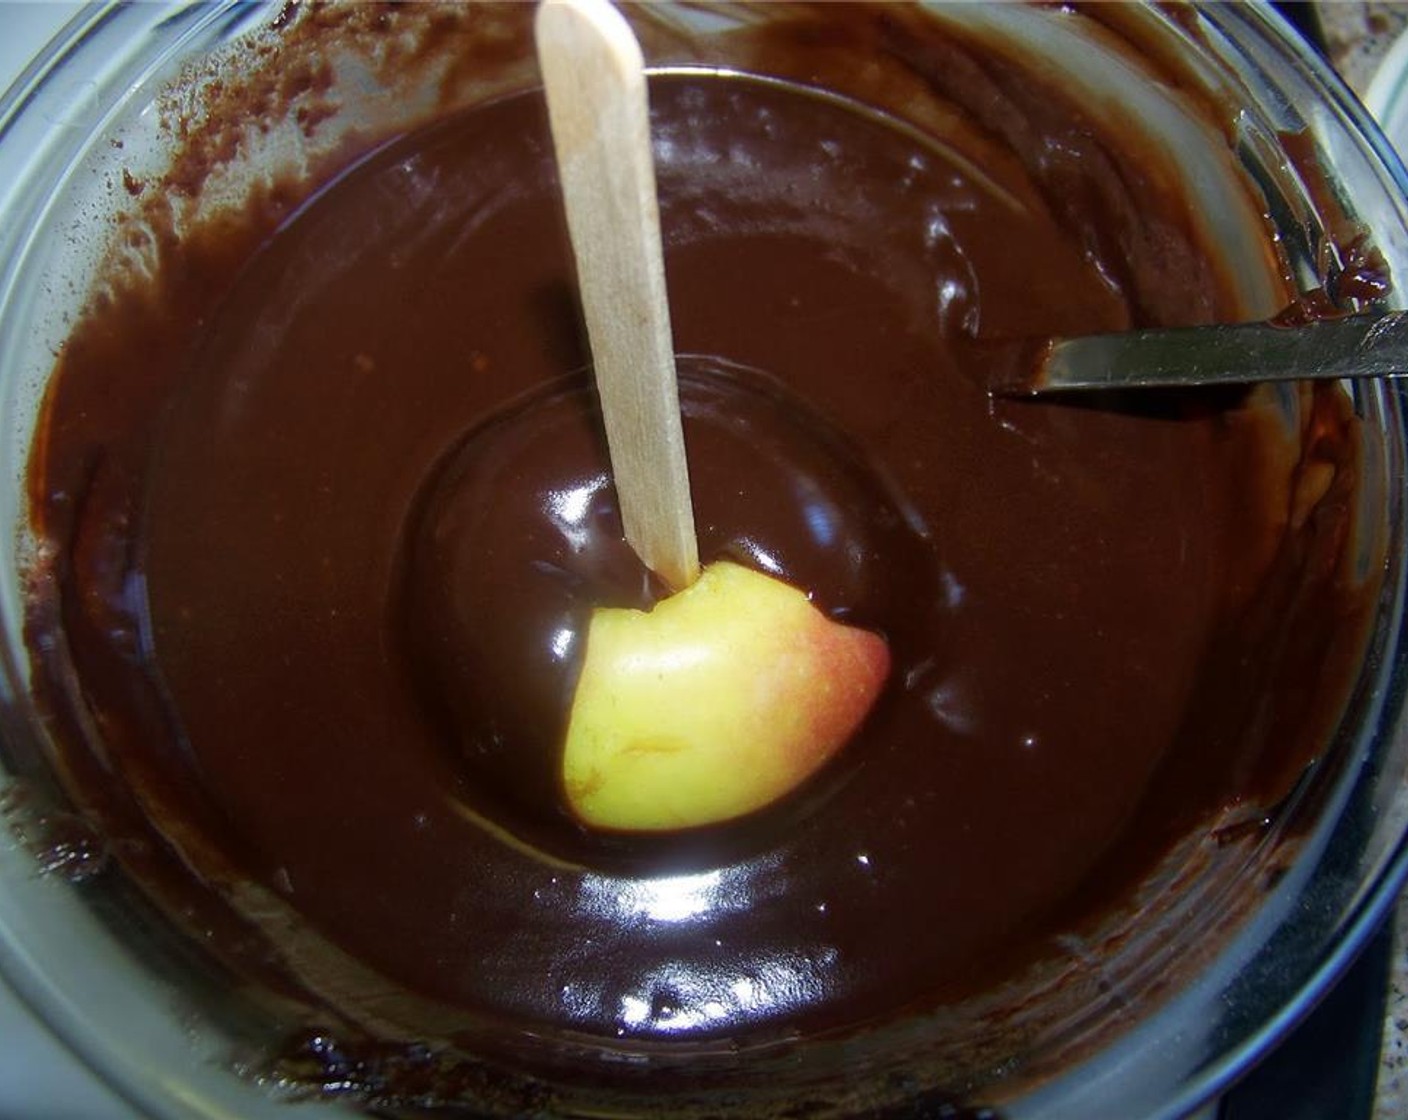 step 4 Dip apples into the melted chocolate and then sprinkle or dip into M&M's® Milk Chocolate Candy (to taste), Sweetened Coconut Flakes (to taste), Chocolate Sprinkles (to taste), or your favorite garnishes.